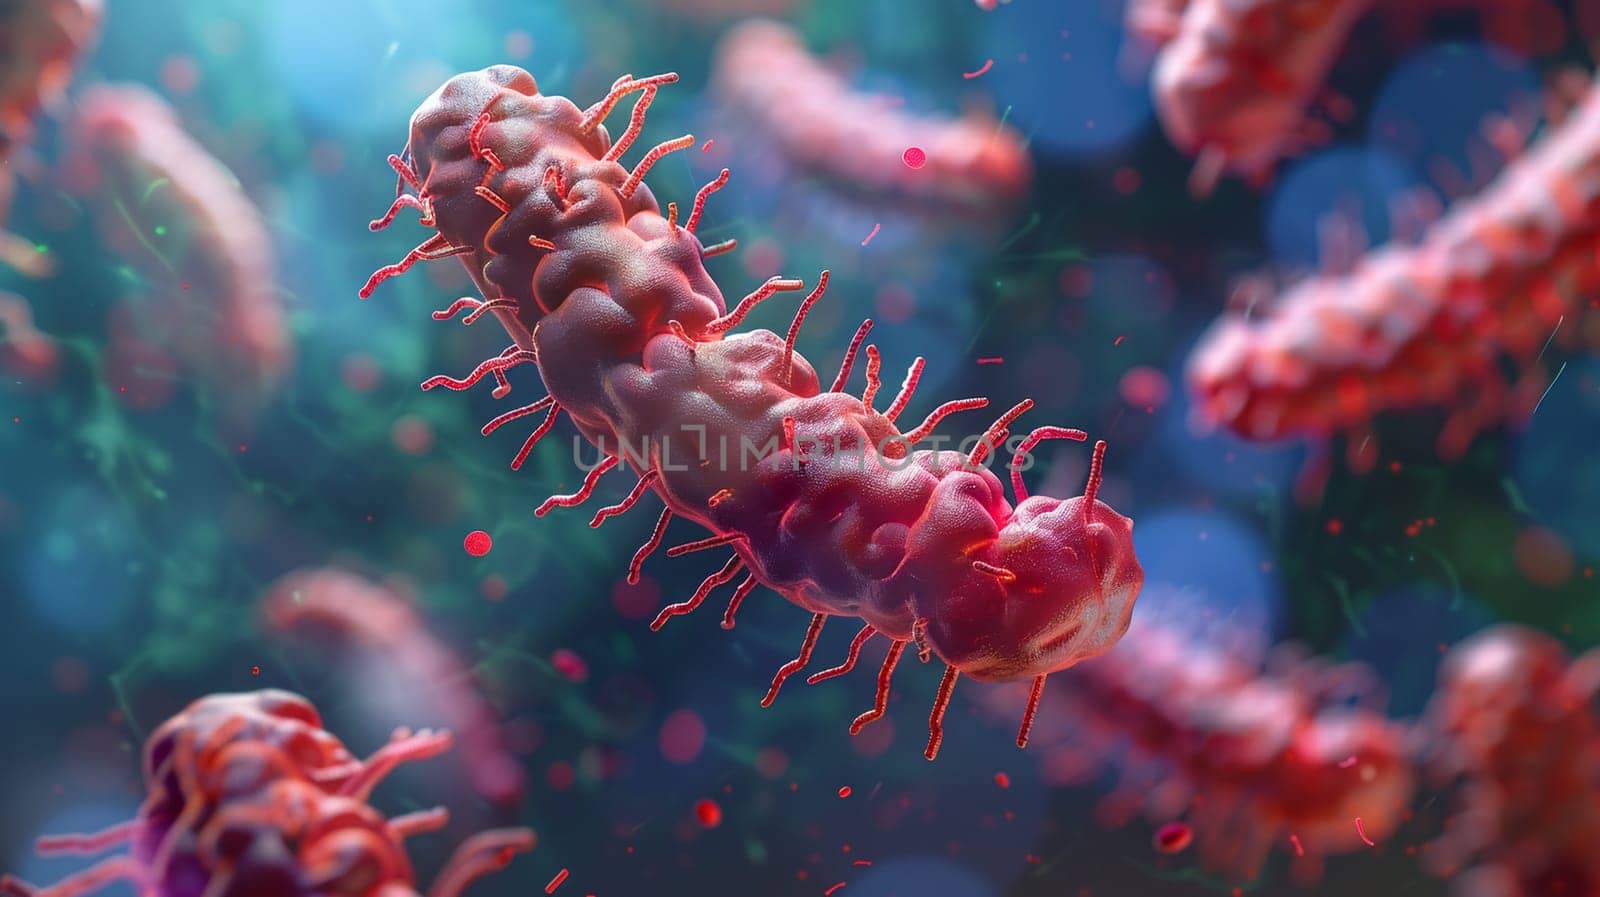 Close-up digital illustration of Streptococcal bacteria, microscopic view of pathogen responsible for infections such as pharyngitis, scarlet fever